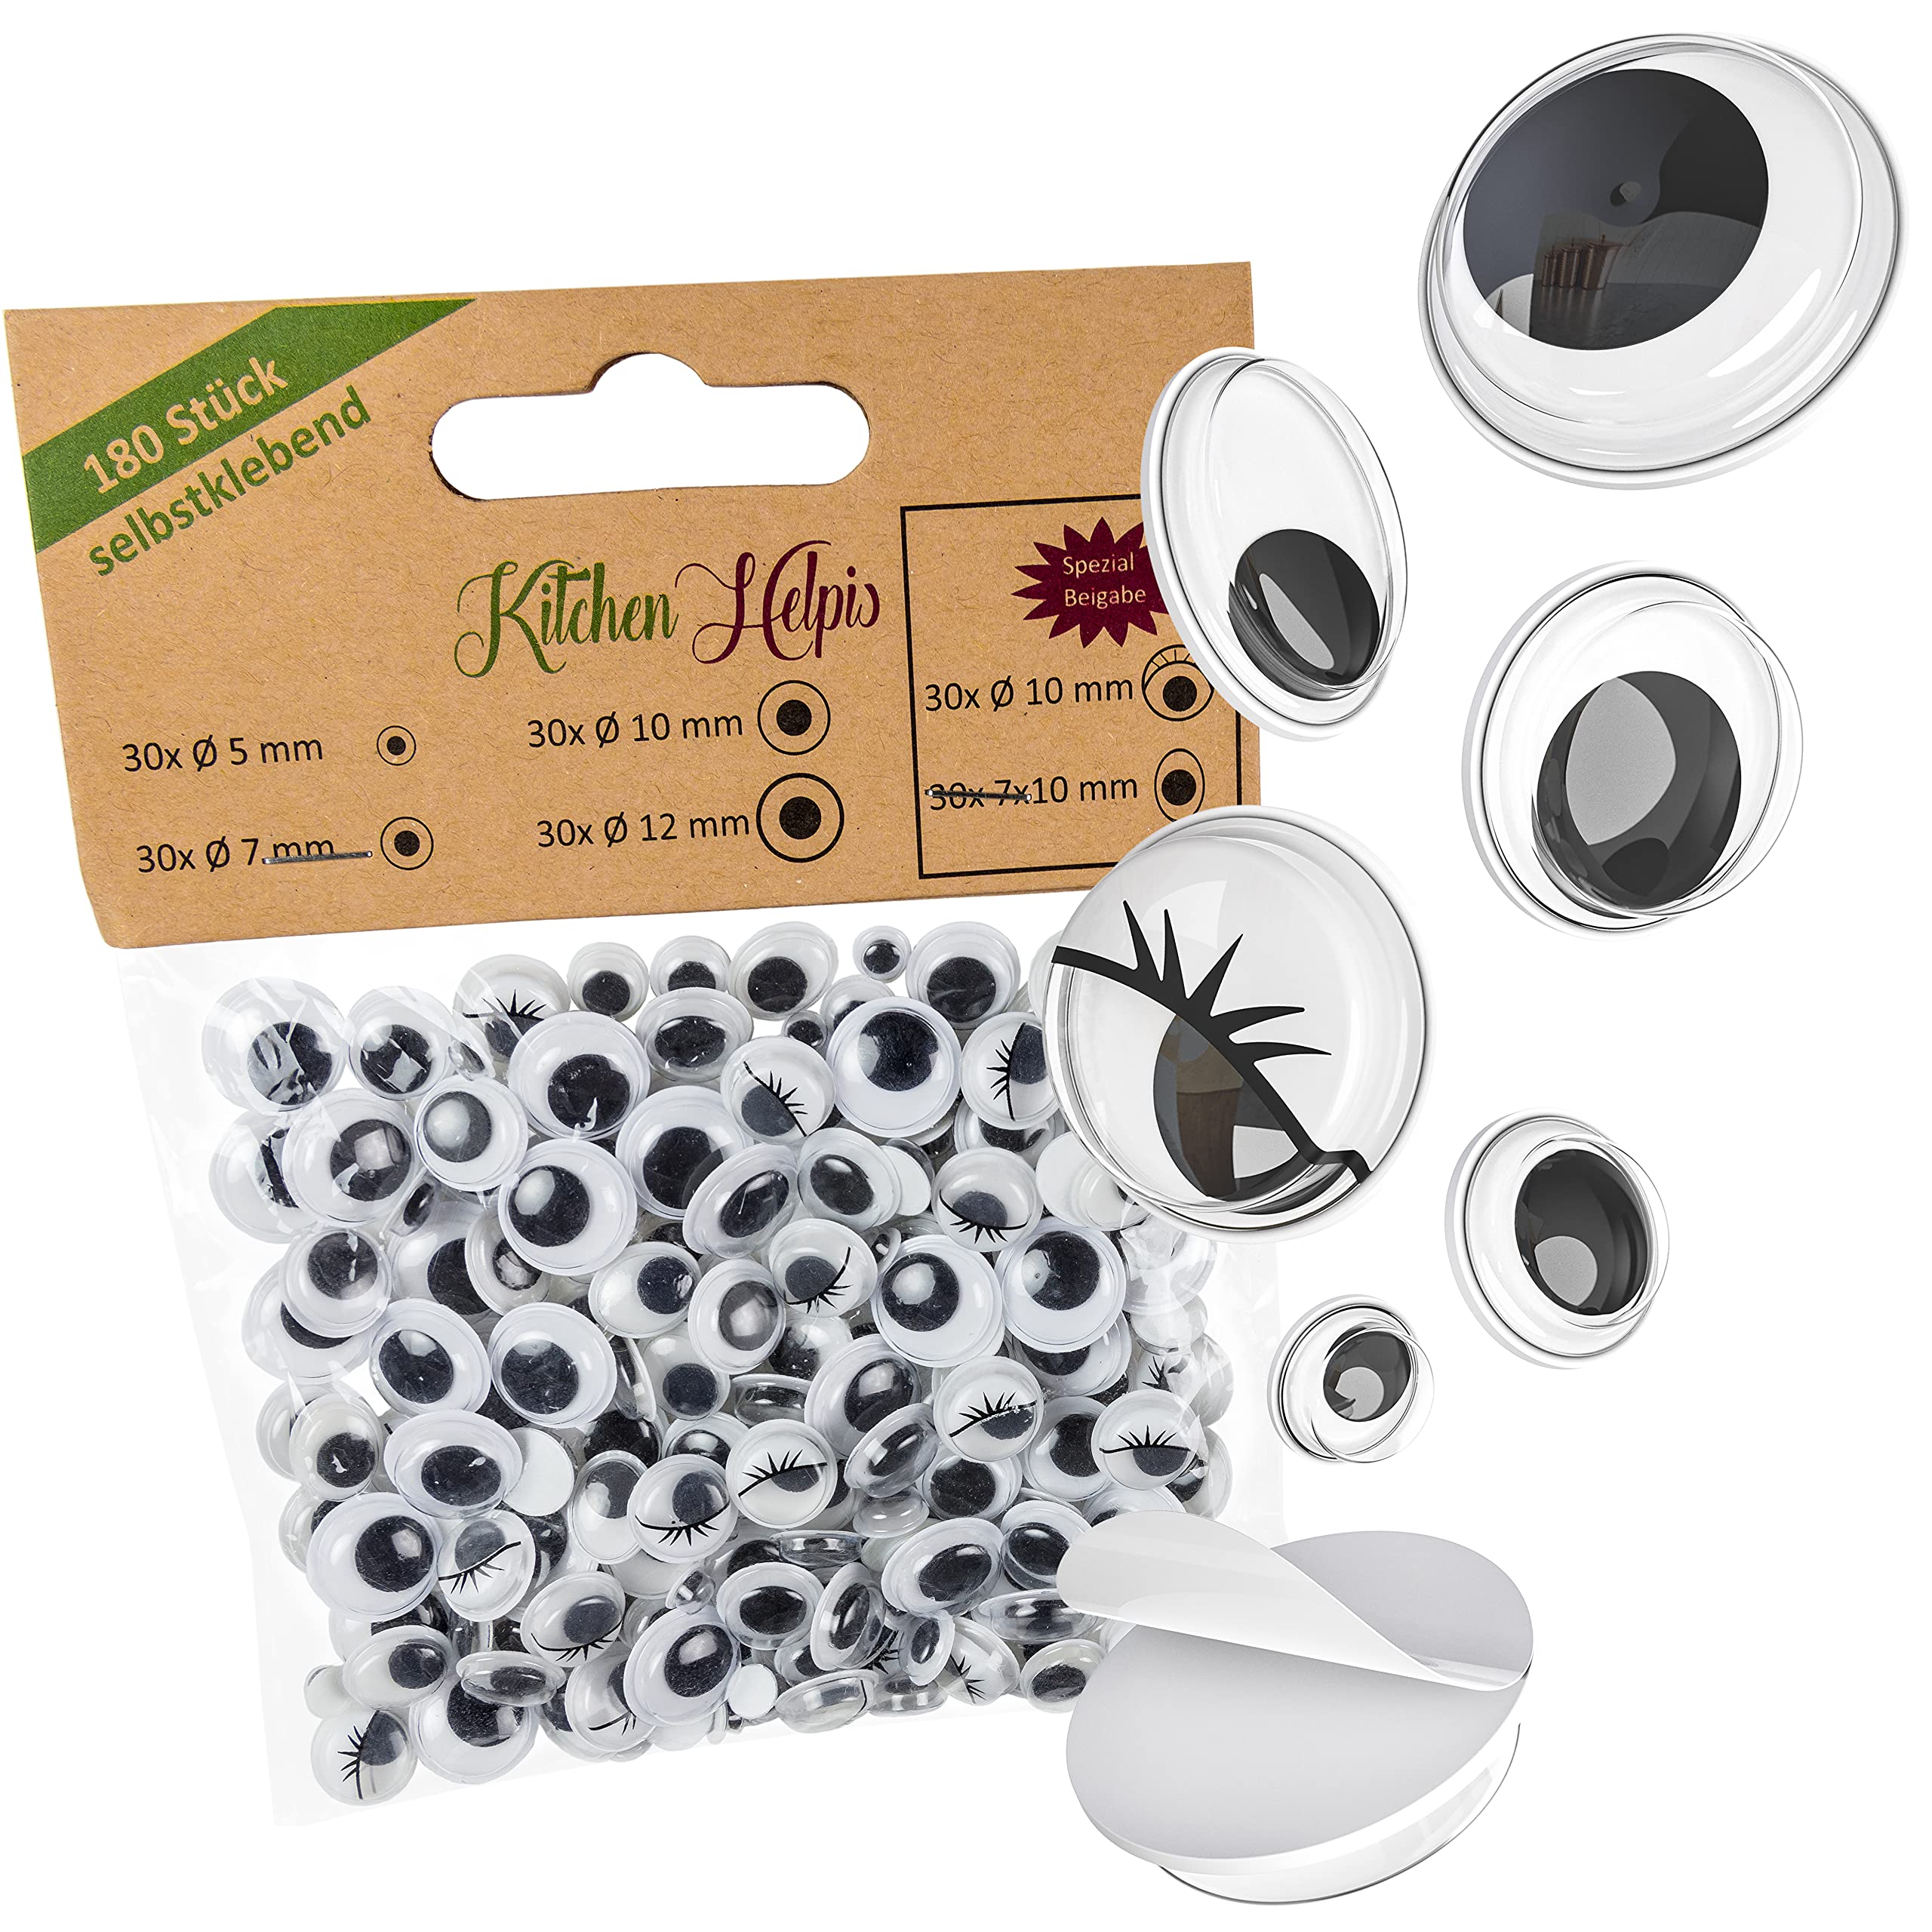 Kitchen Helpis Funny Google Eyes self Adhesive for handicrafts, 180 Pieces  Wiggly Eyes, Googley Eyes Adhesive Large and Small, Stick on Eyes Stickers  Mix, Wiggly Eyes self-Adhesive, googleeyes Craft 180 pcs